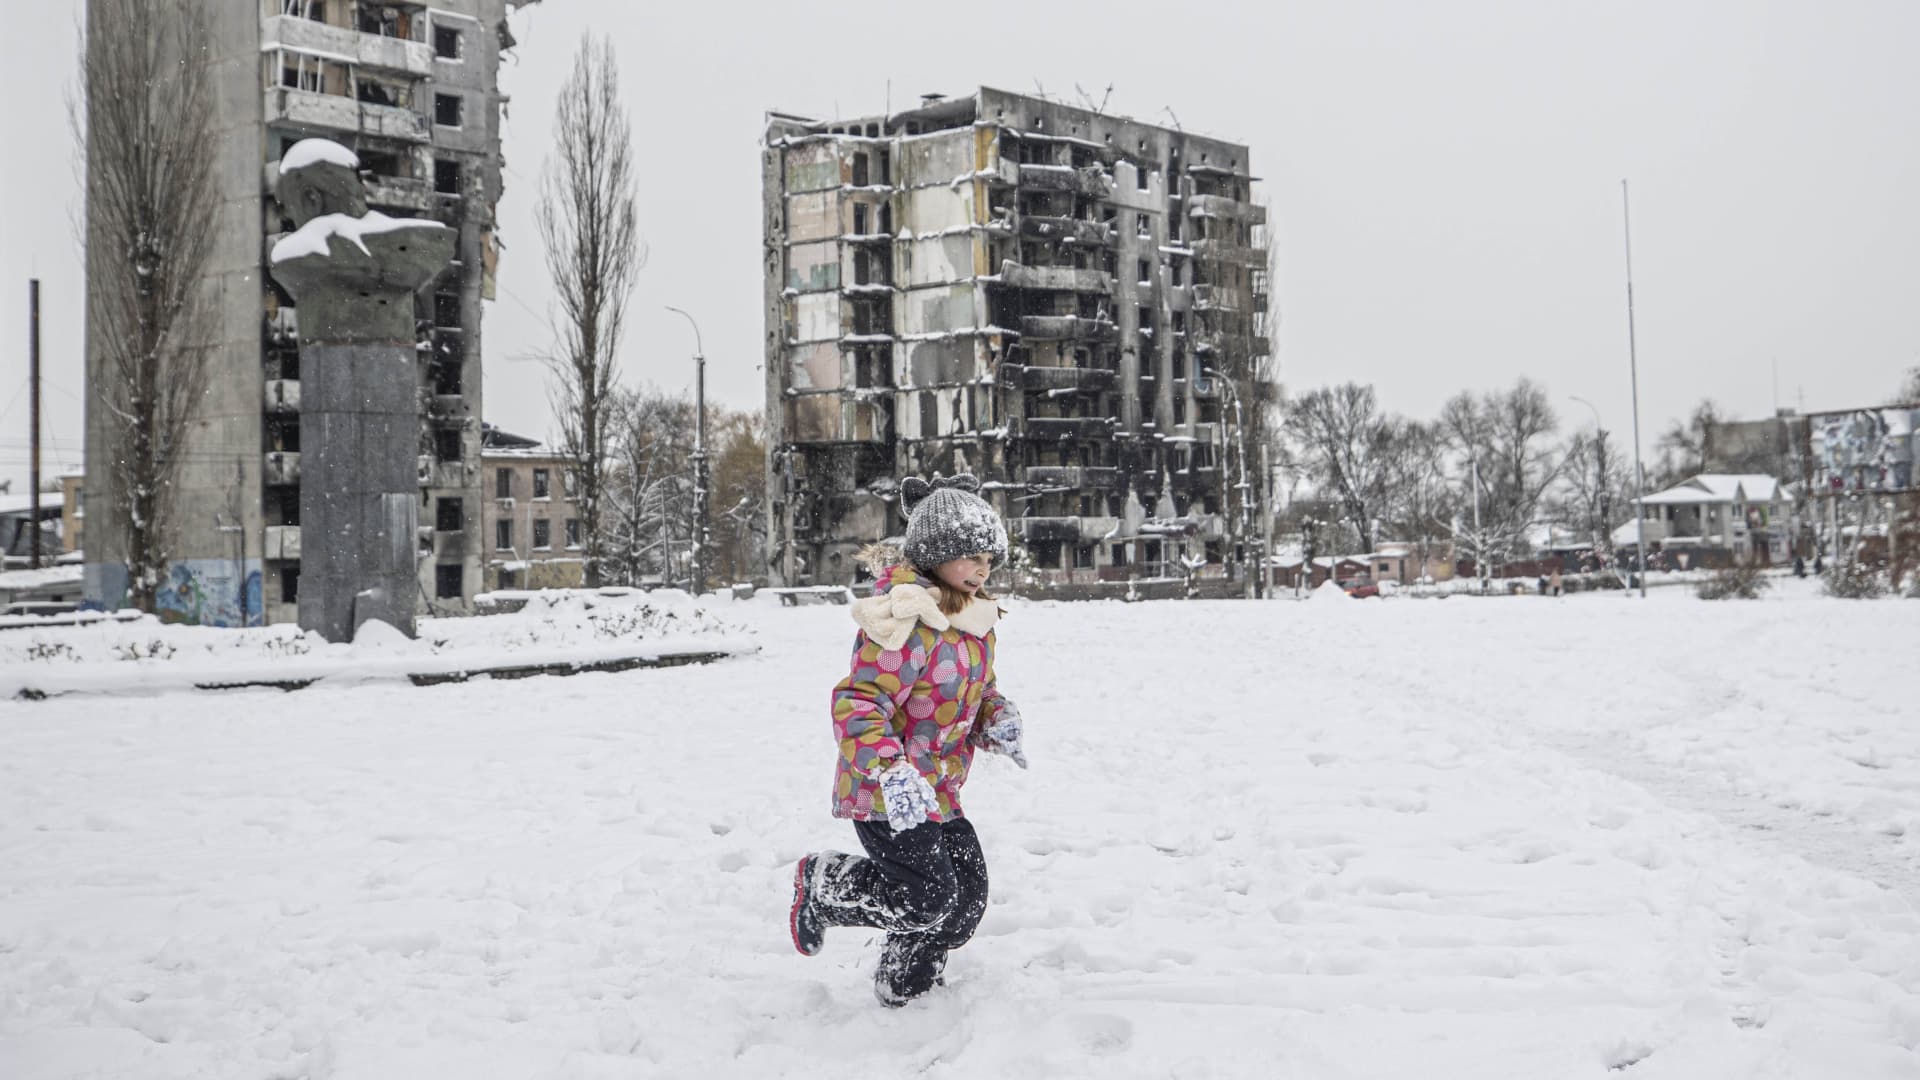 A child plays snowball as daily life continues in Borodyanka, following the withdrawal of Russian forces in Kyiv district, Ukraine on November 20, 2022.